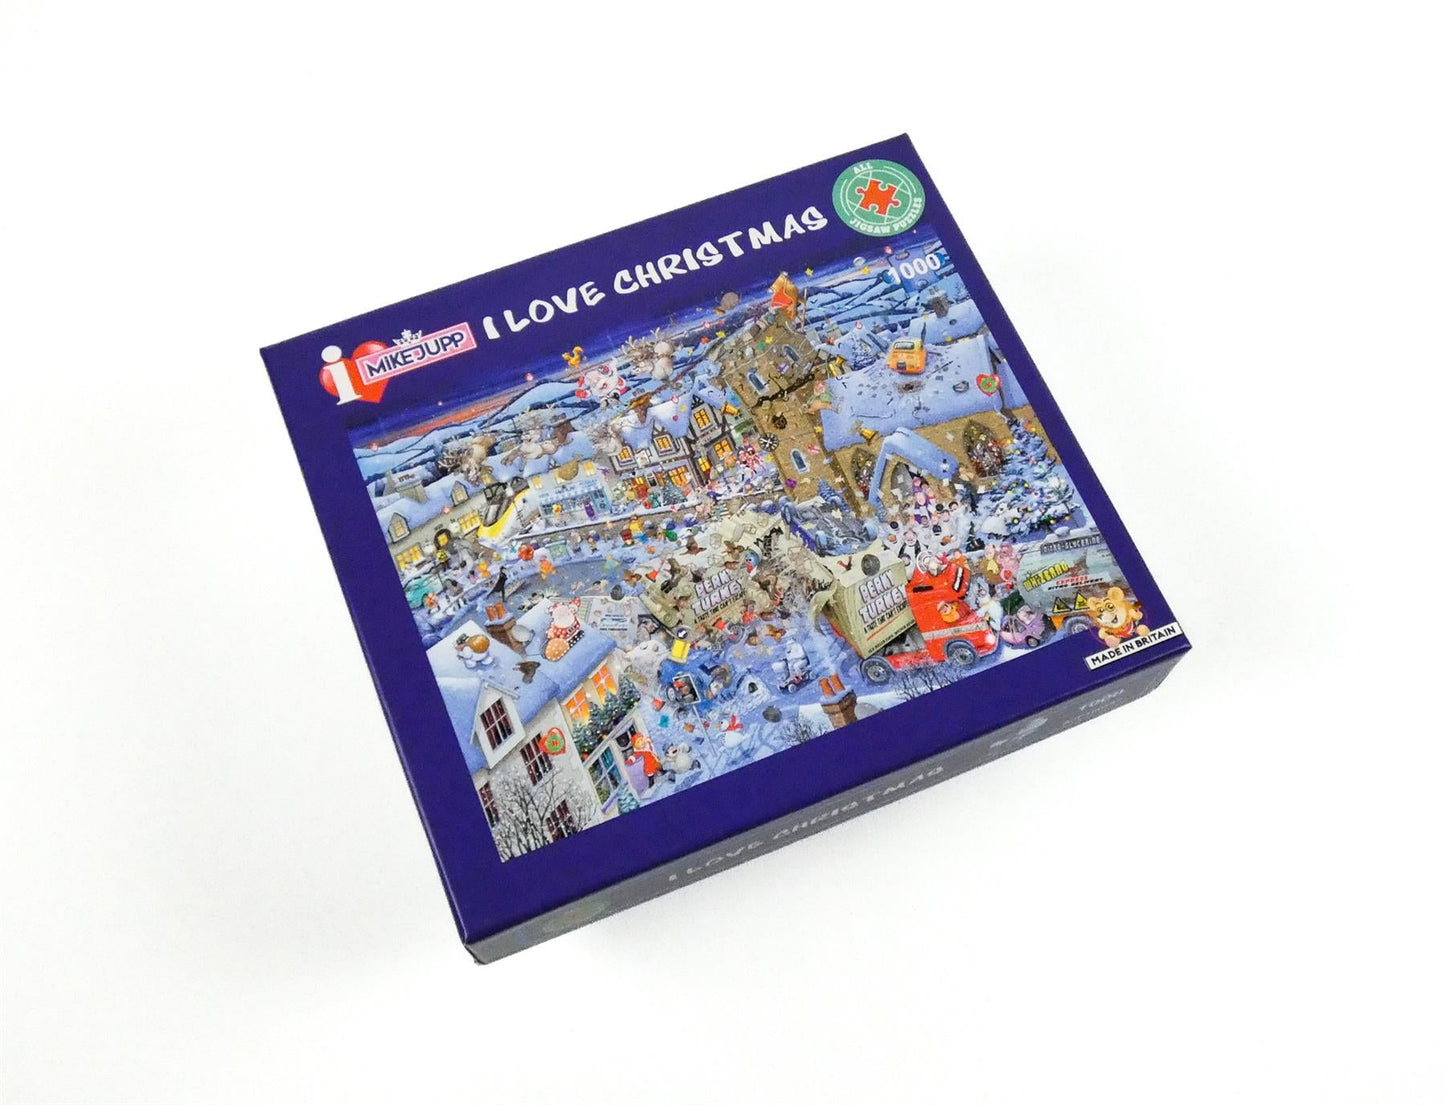 Mike Jupp I Love Christmas 1000 Piece Jigsaw Puzzle